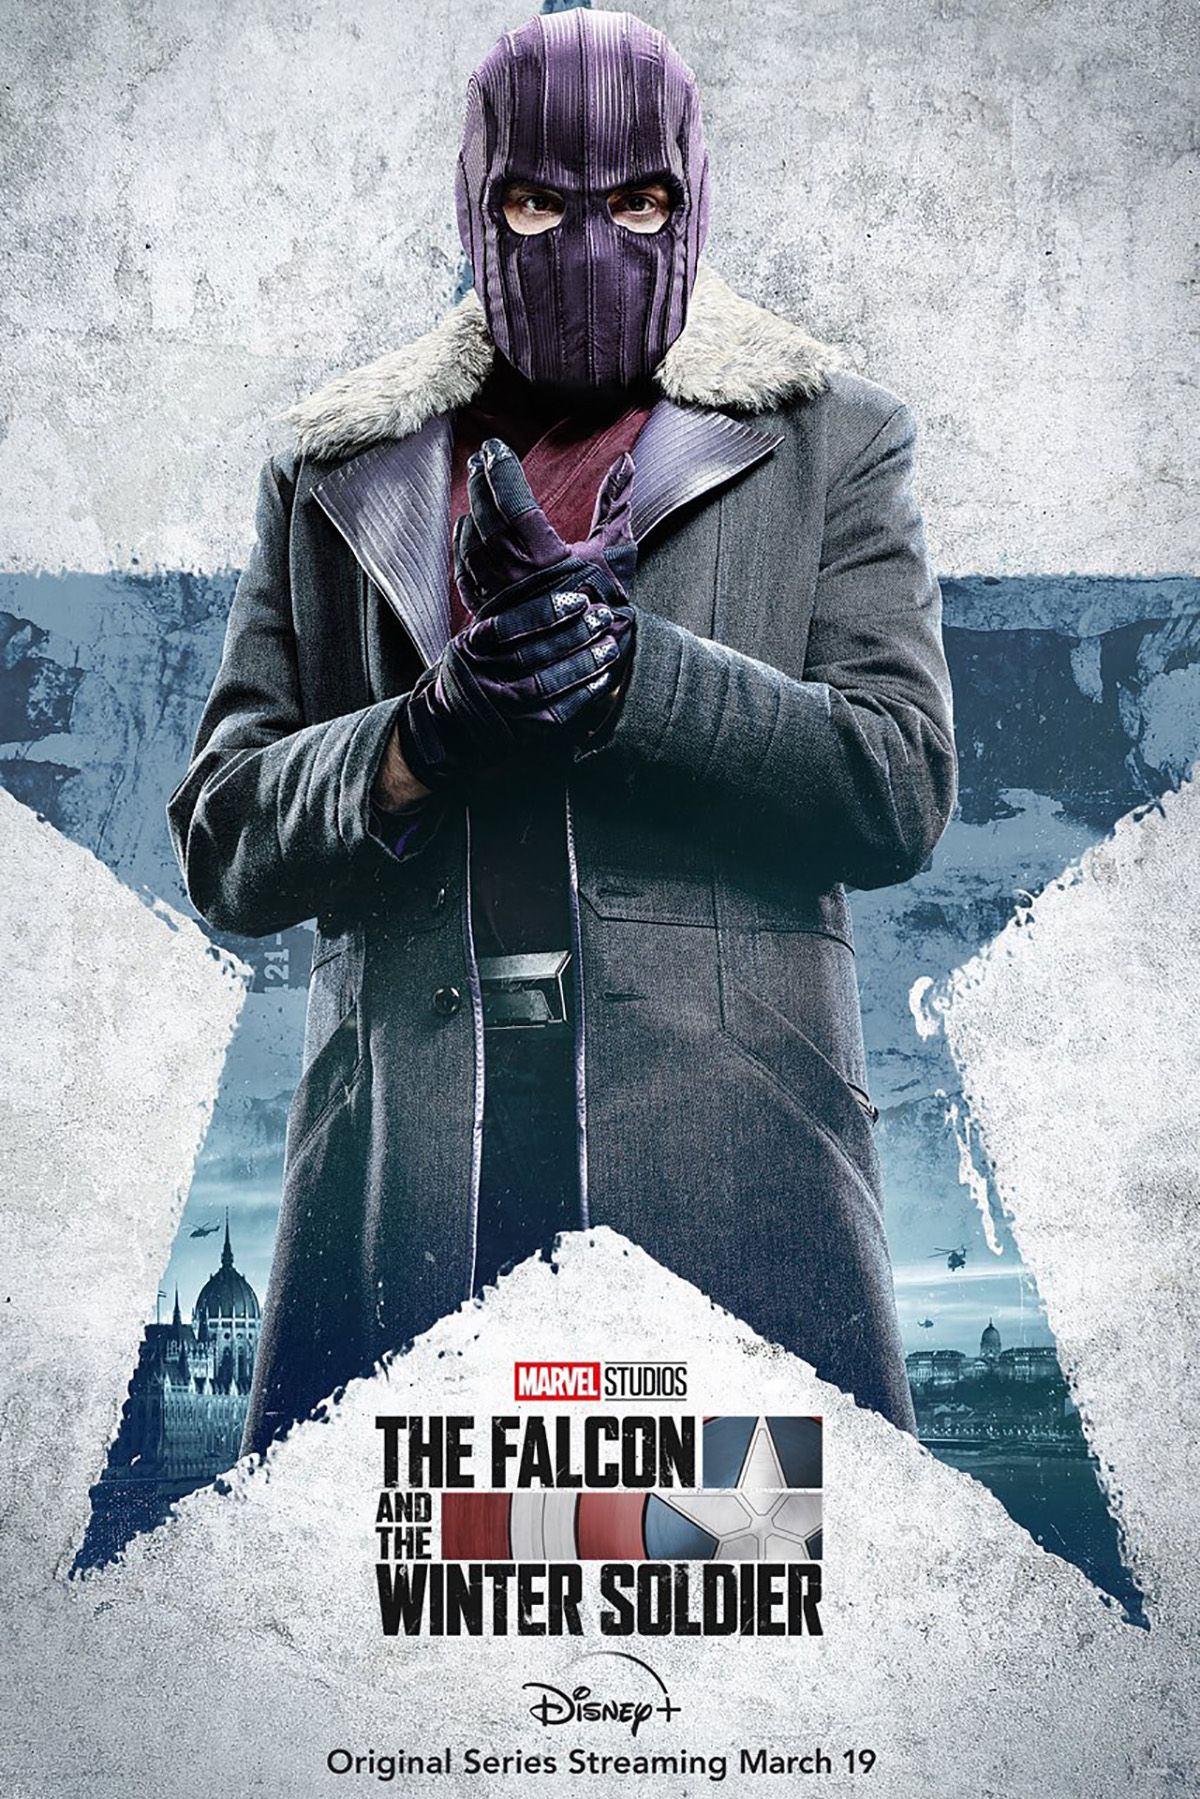 The Falcon and the Winter Soldier poster featuring Daniel Brühl